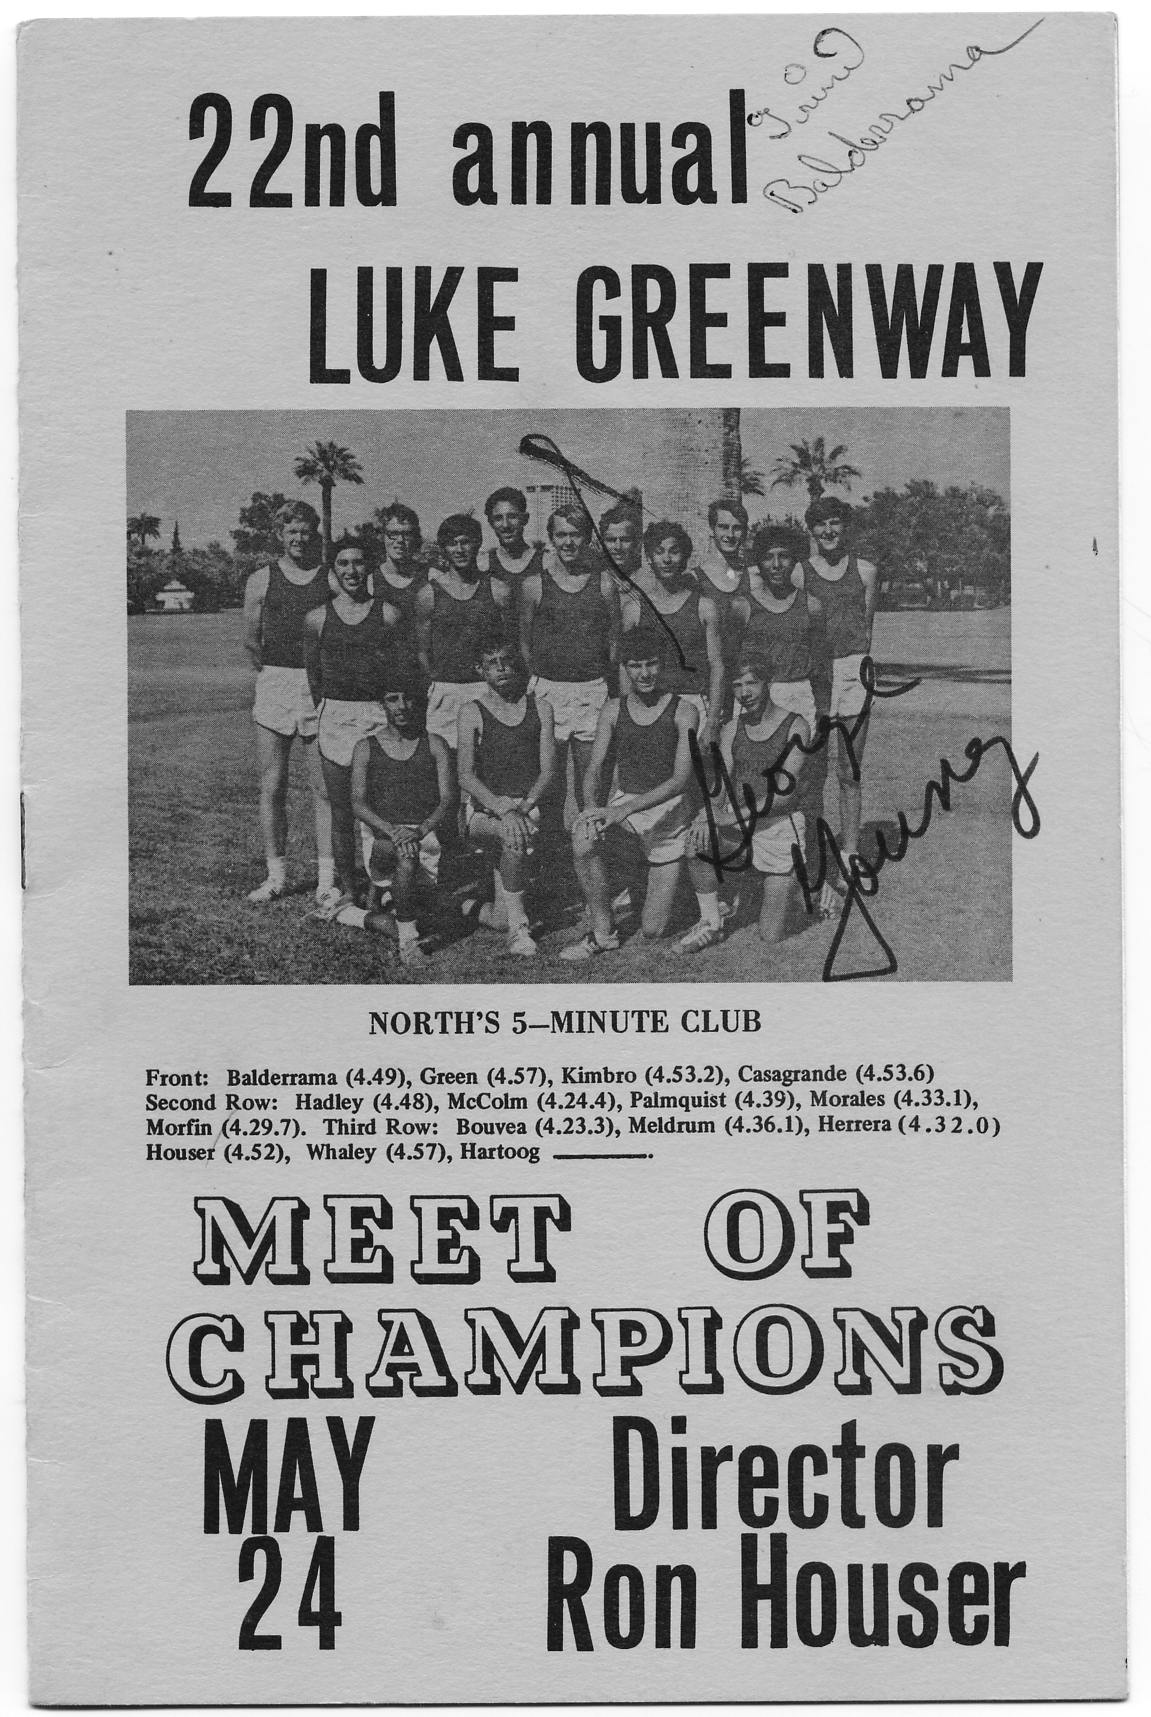 Luke Greenway track meet program cover featuring North Phoenix High School track's George Morfin, David Bouvea, Pat Meldrum, Robert Herrera, Coach Ron Rouser, Larry Whaley, Gary CasaGrande & autograph by Arizona distance running great George Young.